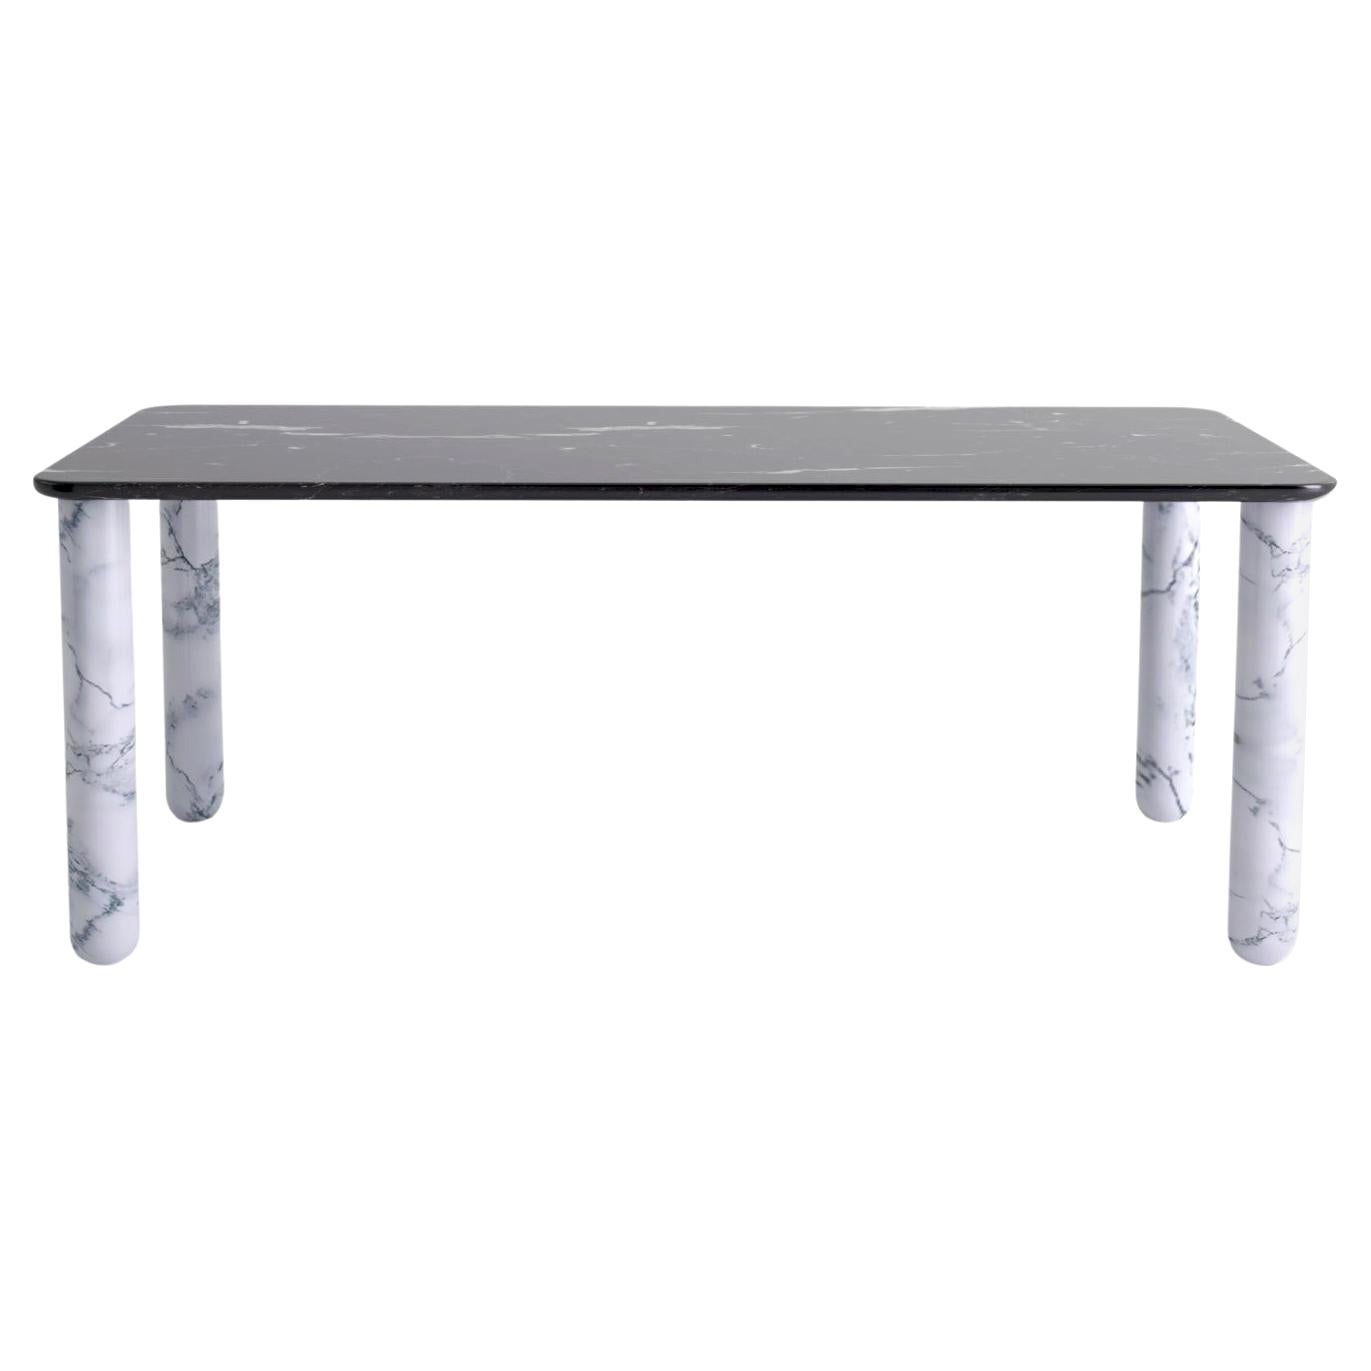 XL Large Black and White Marble "Sunday" Dining Table, Jean-Baptiste Souletie For Sale